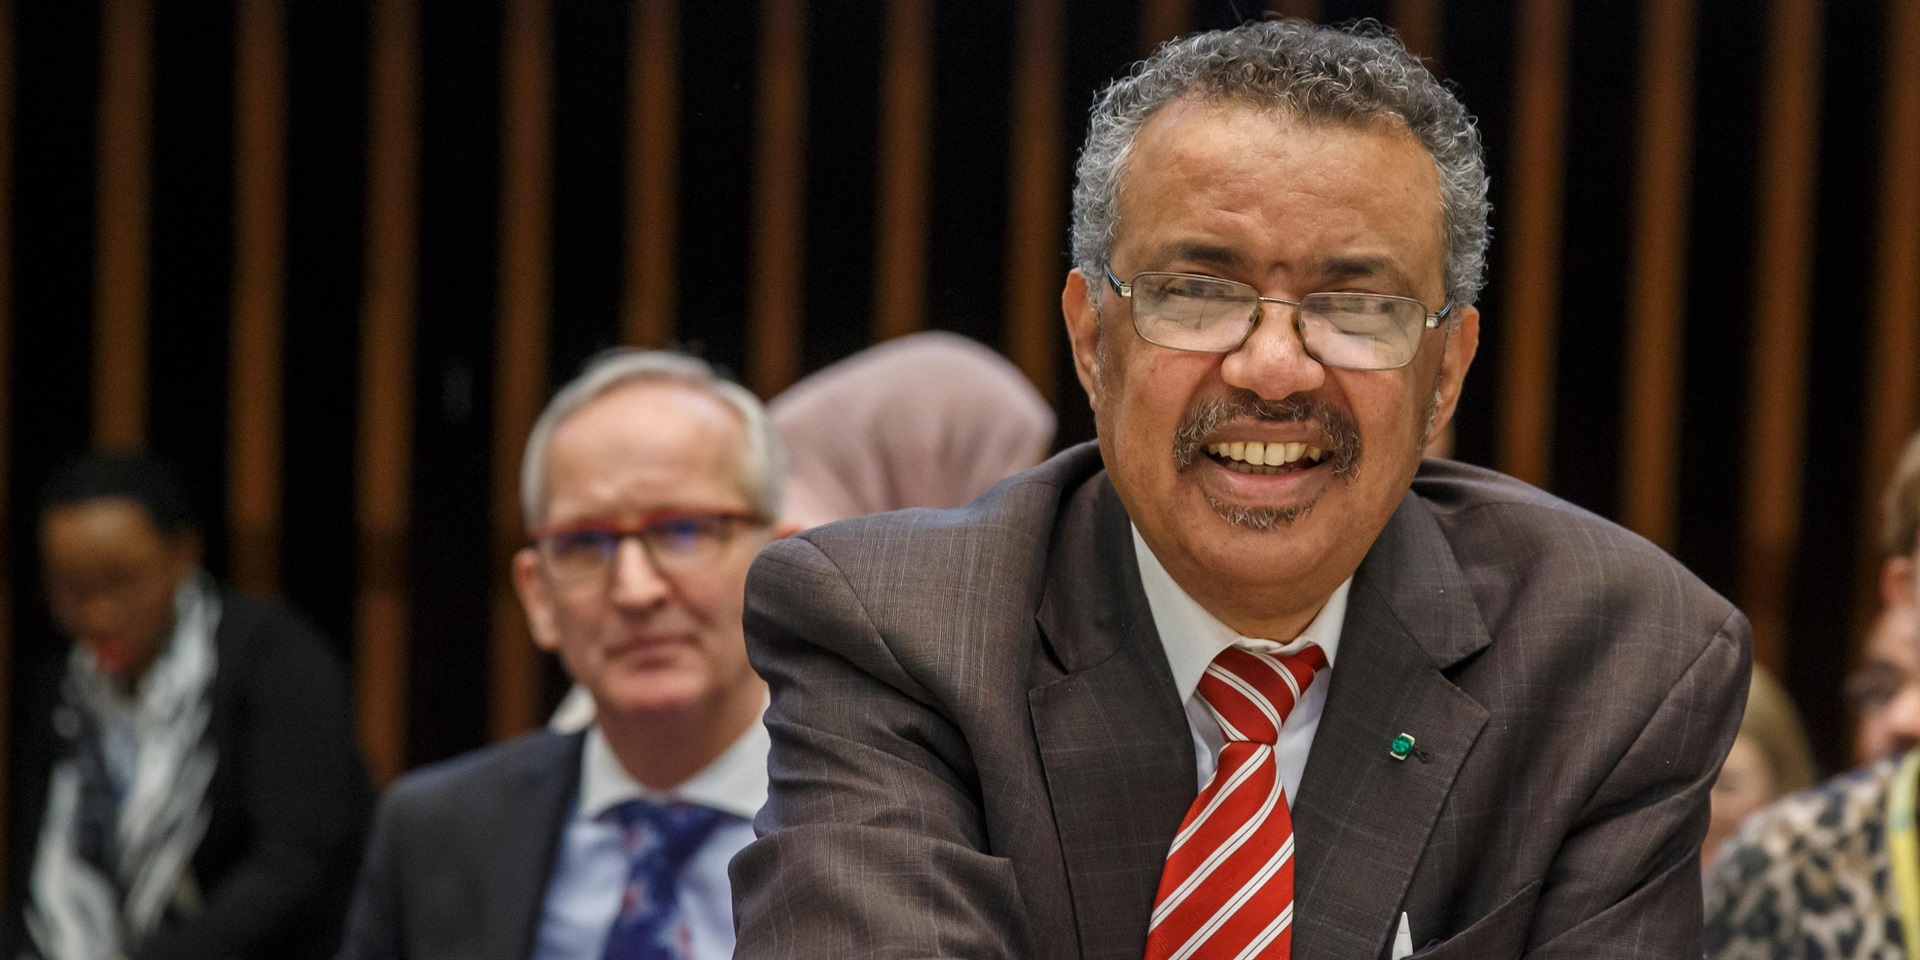 WHO director-general Tedros Adhanom Ghebreyesus said he would launch an independent evaluation of the organisation’s response “at the earliest appropriate moment.Picture: (Salvatore Di Nolfi/Keystone via AP)